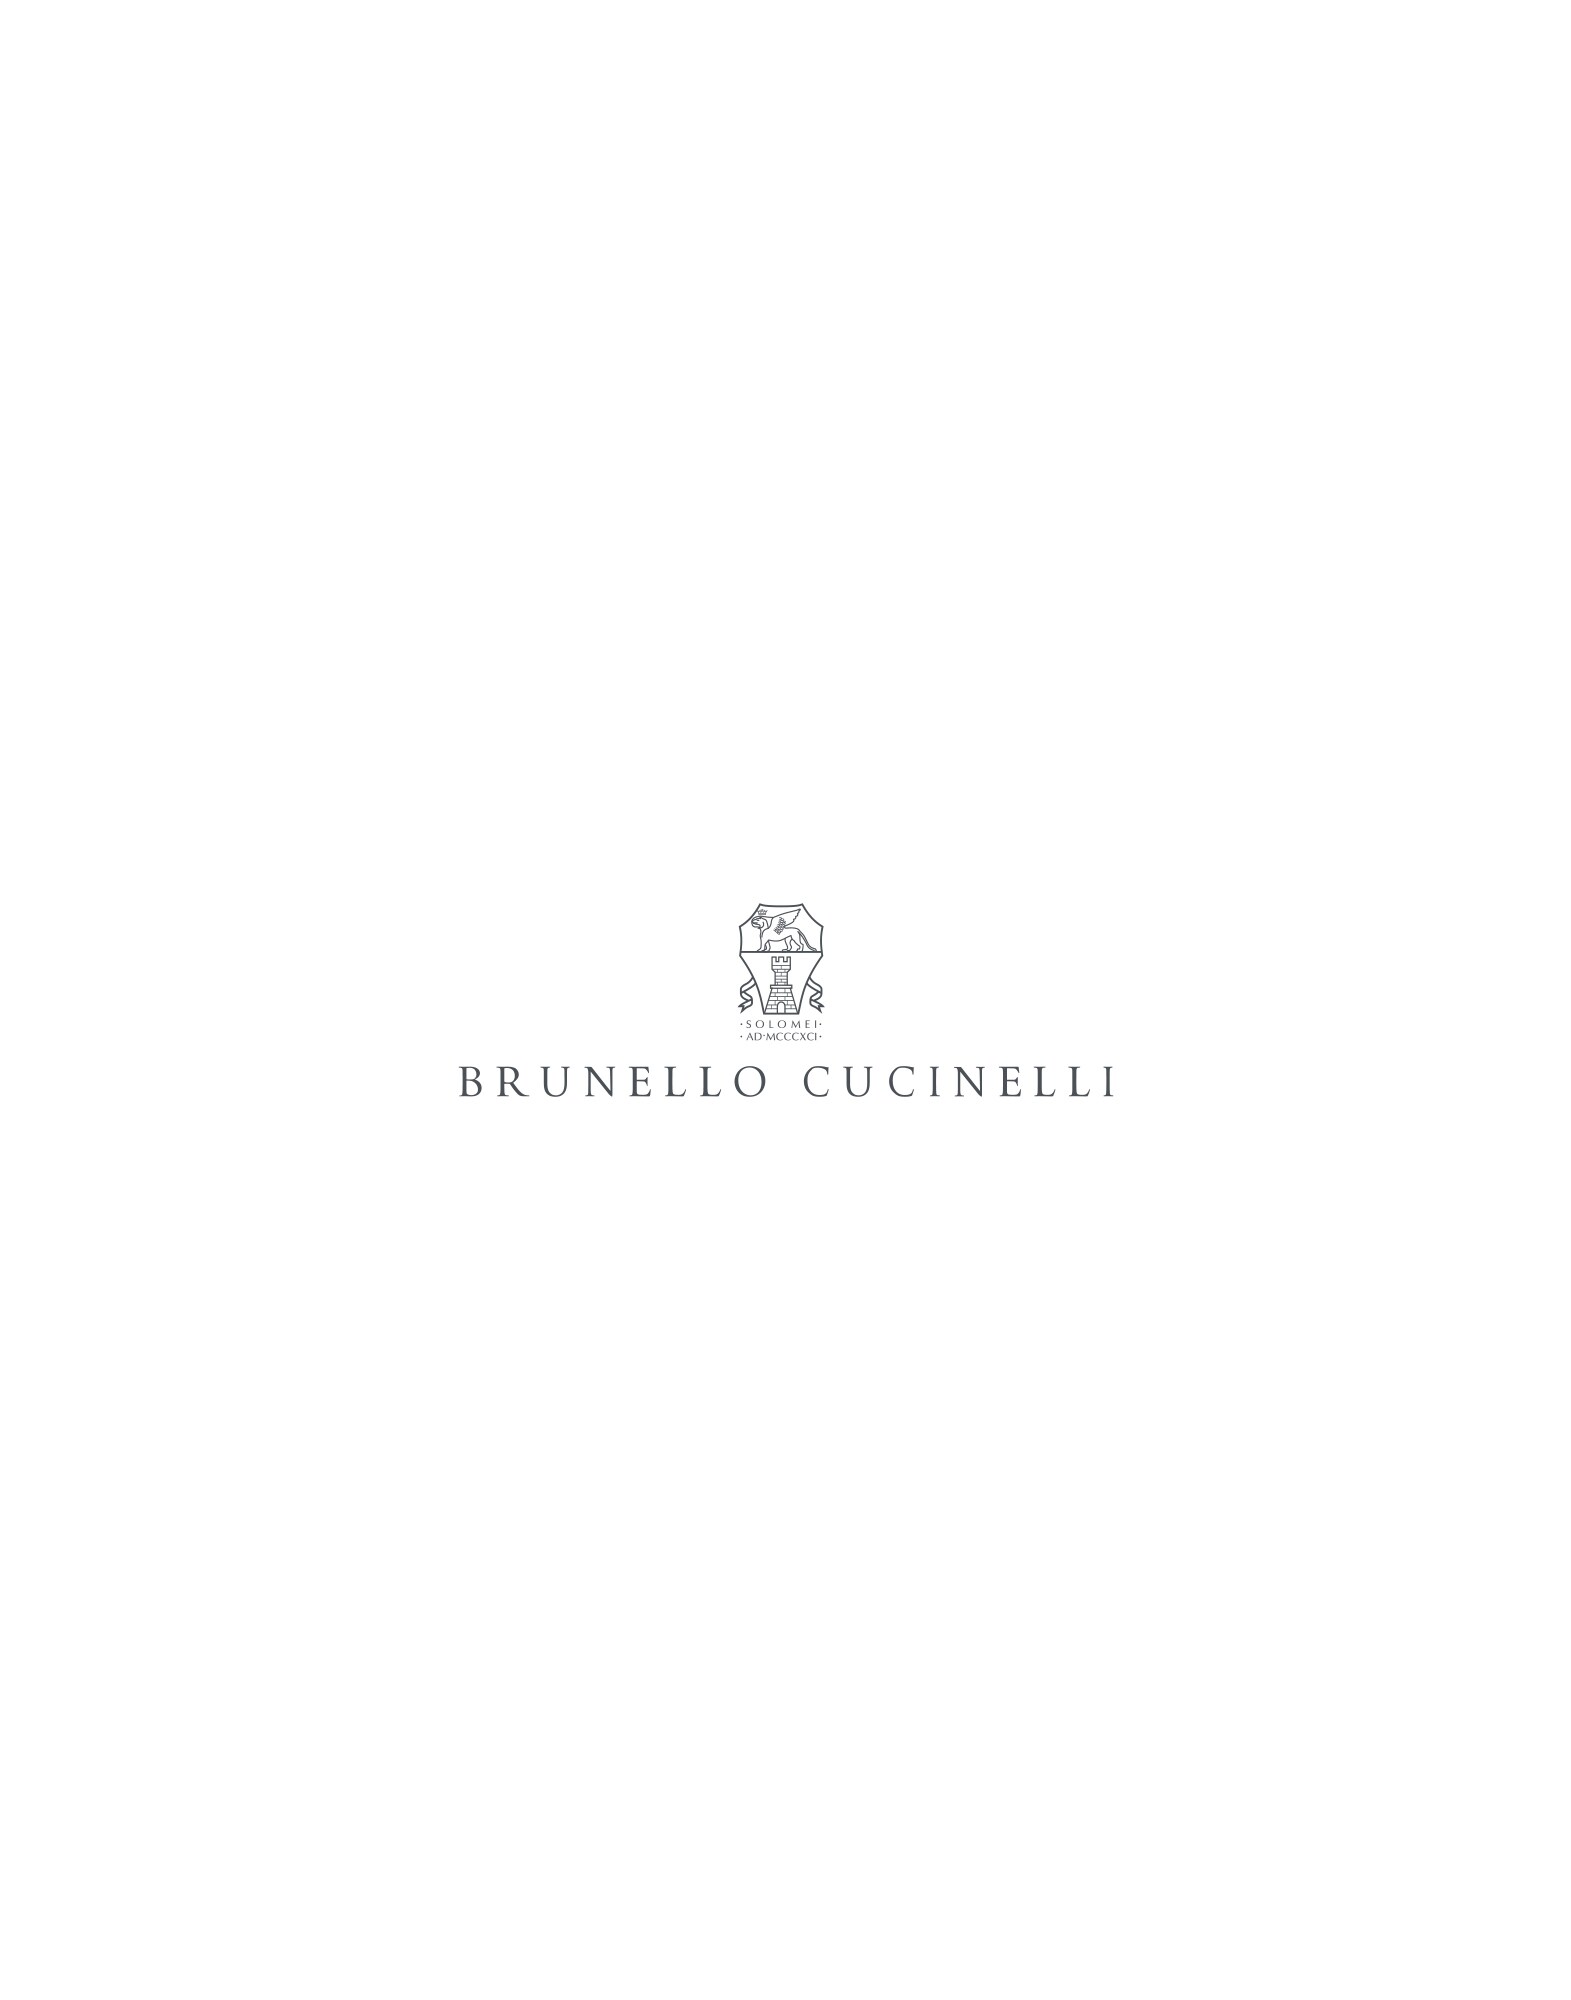 Discover Look 232MOUTFITSNEAKERS - Brunello Cucinelli